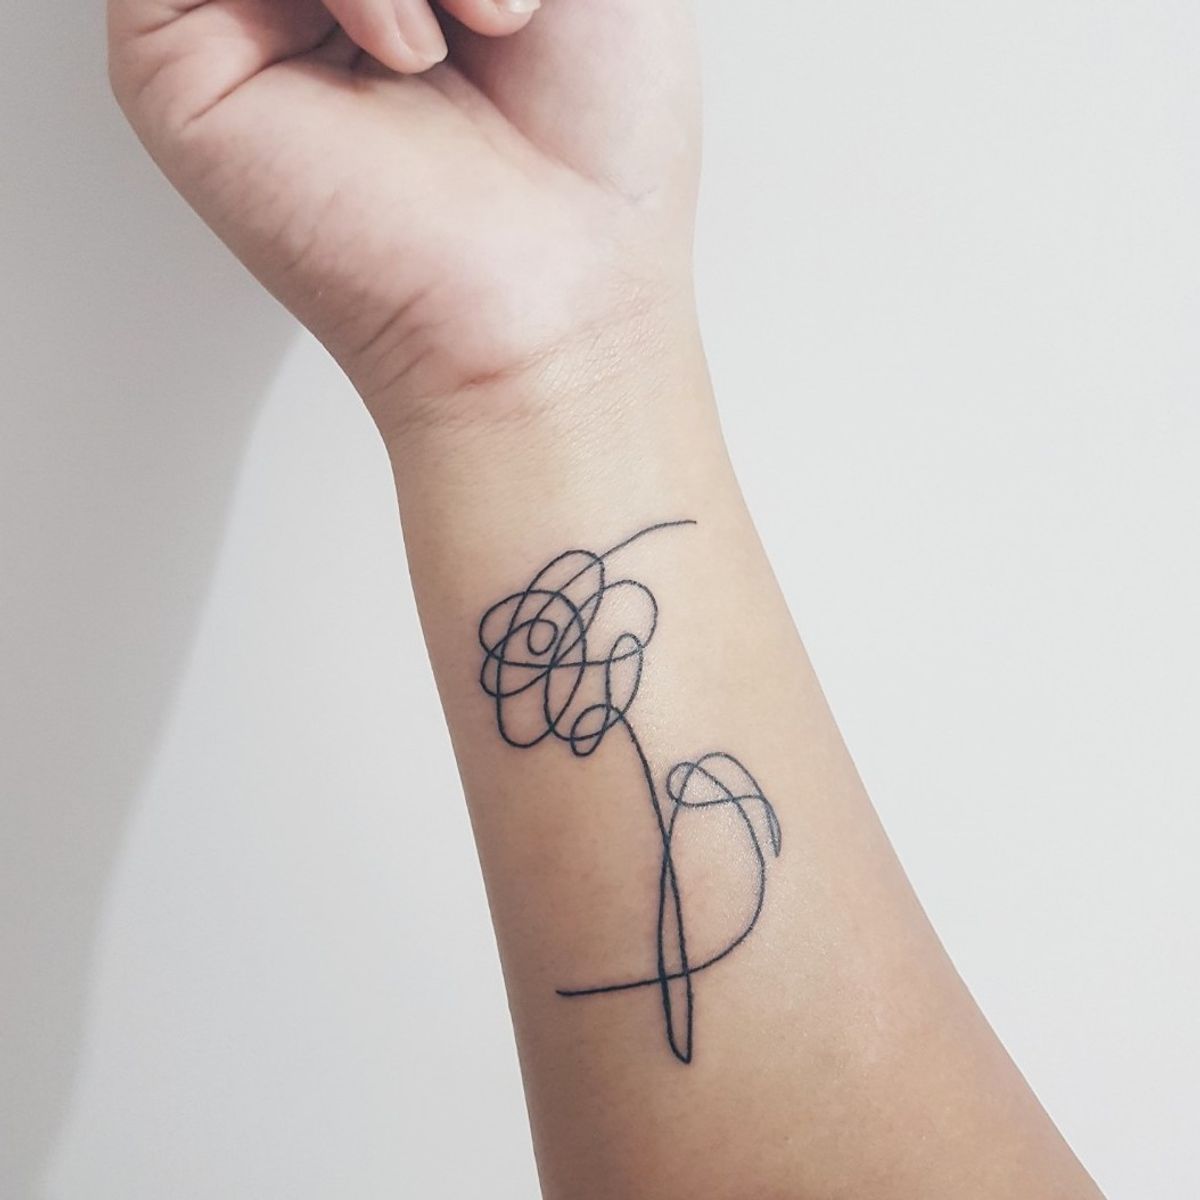 Find your next tattoo. the first love. bts ♡ love yourself, her. album Mar ...